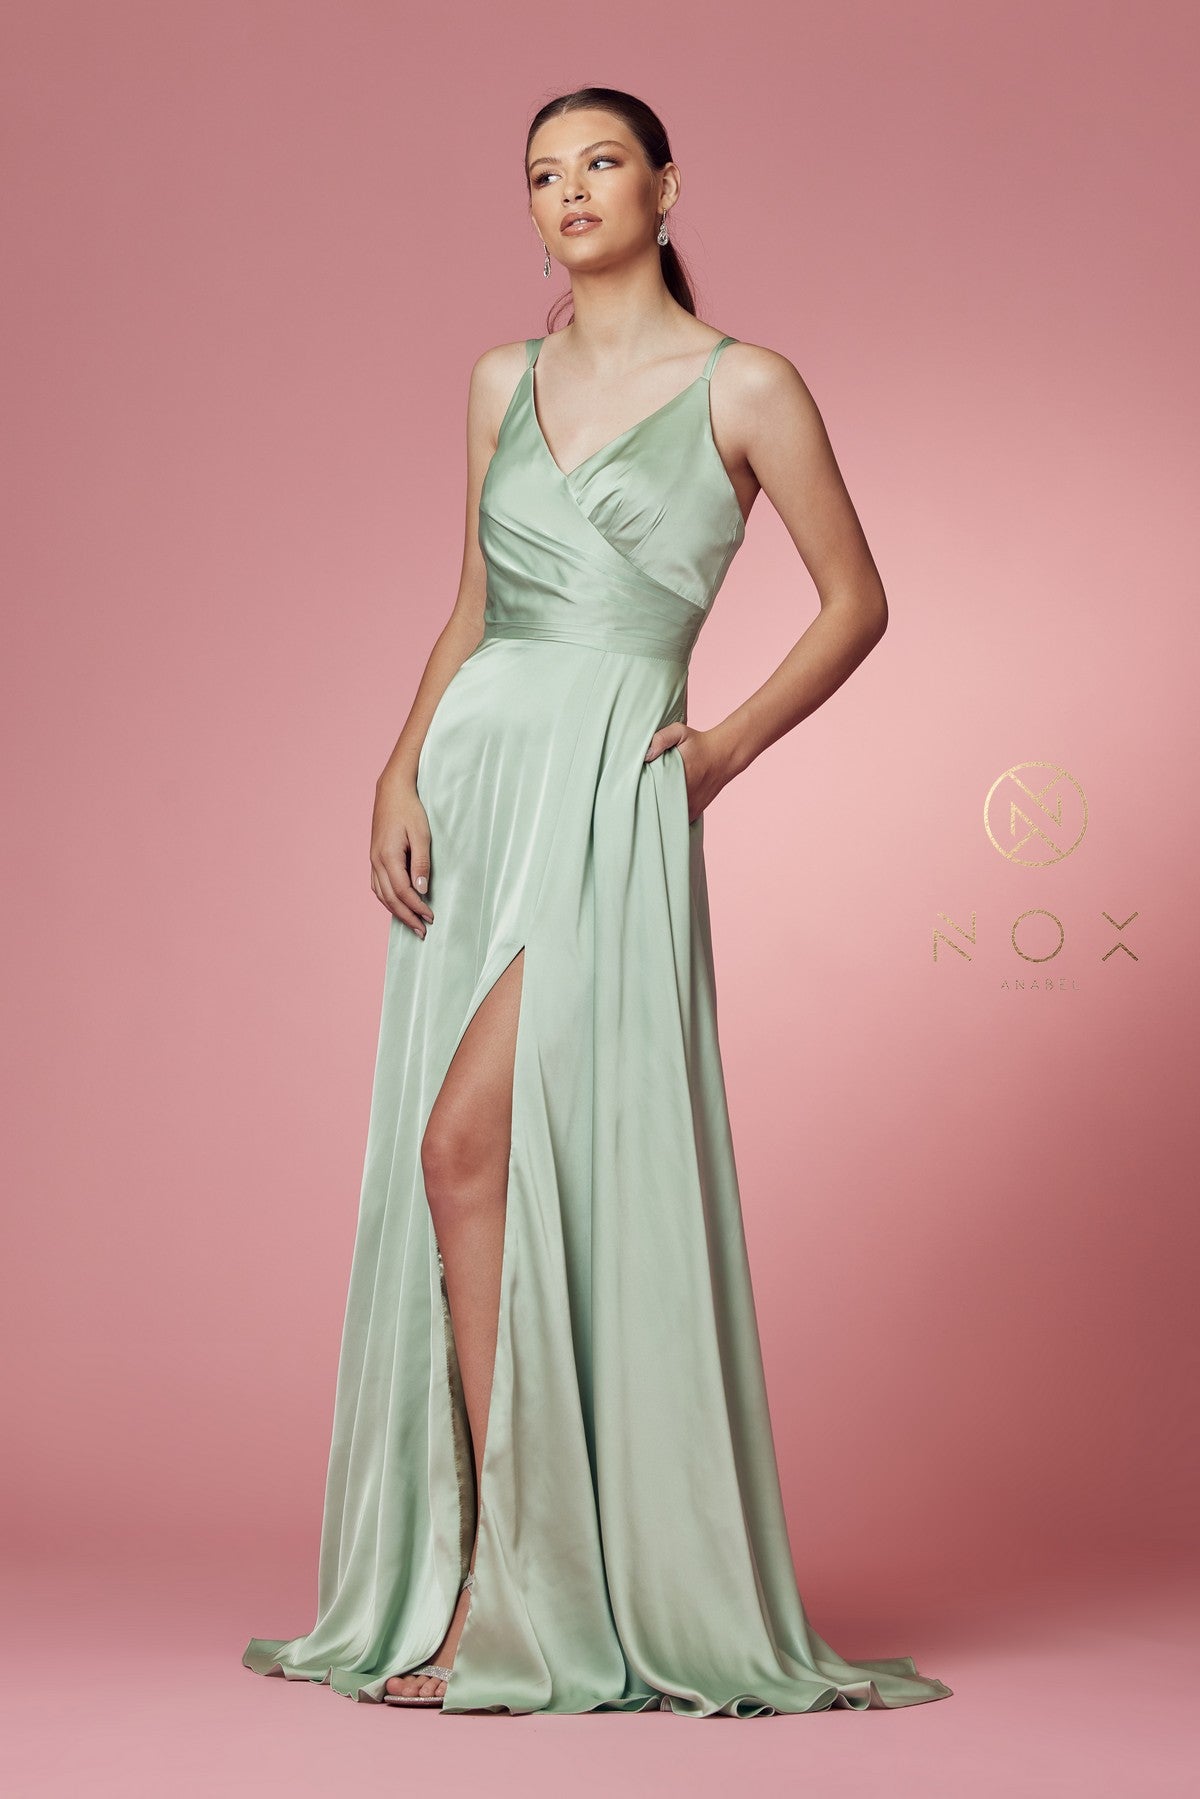 Lace Up Style Prom Dress By  Nox Anabel -E1020